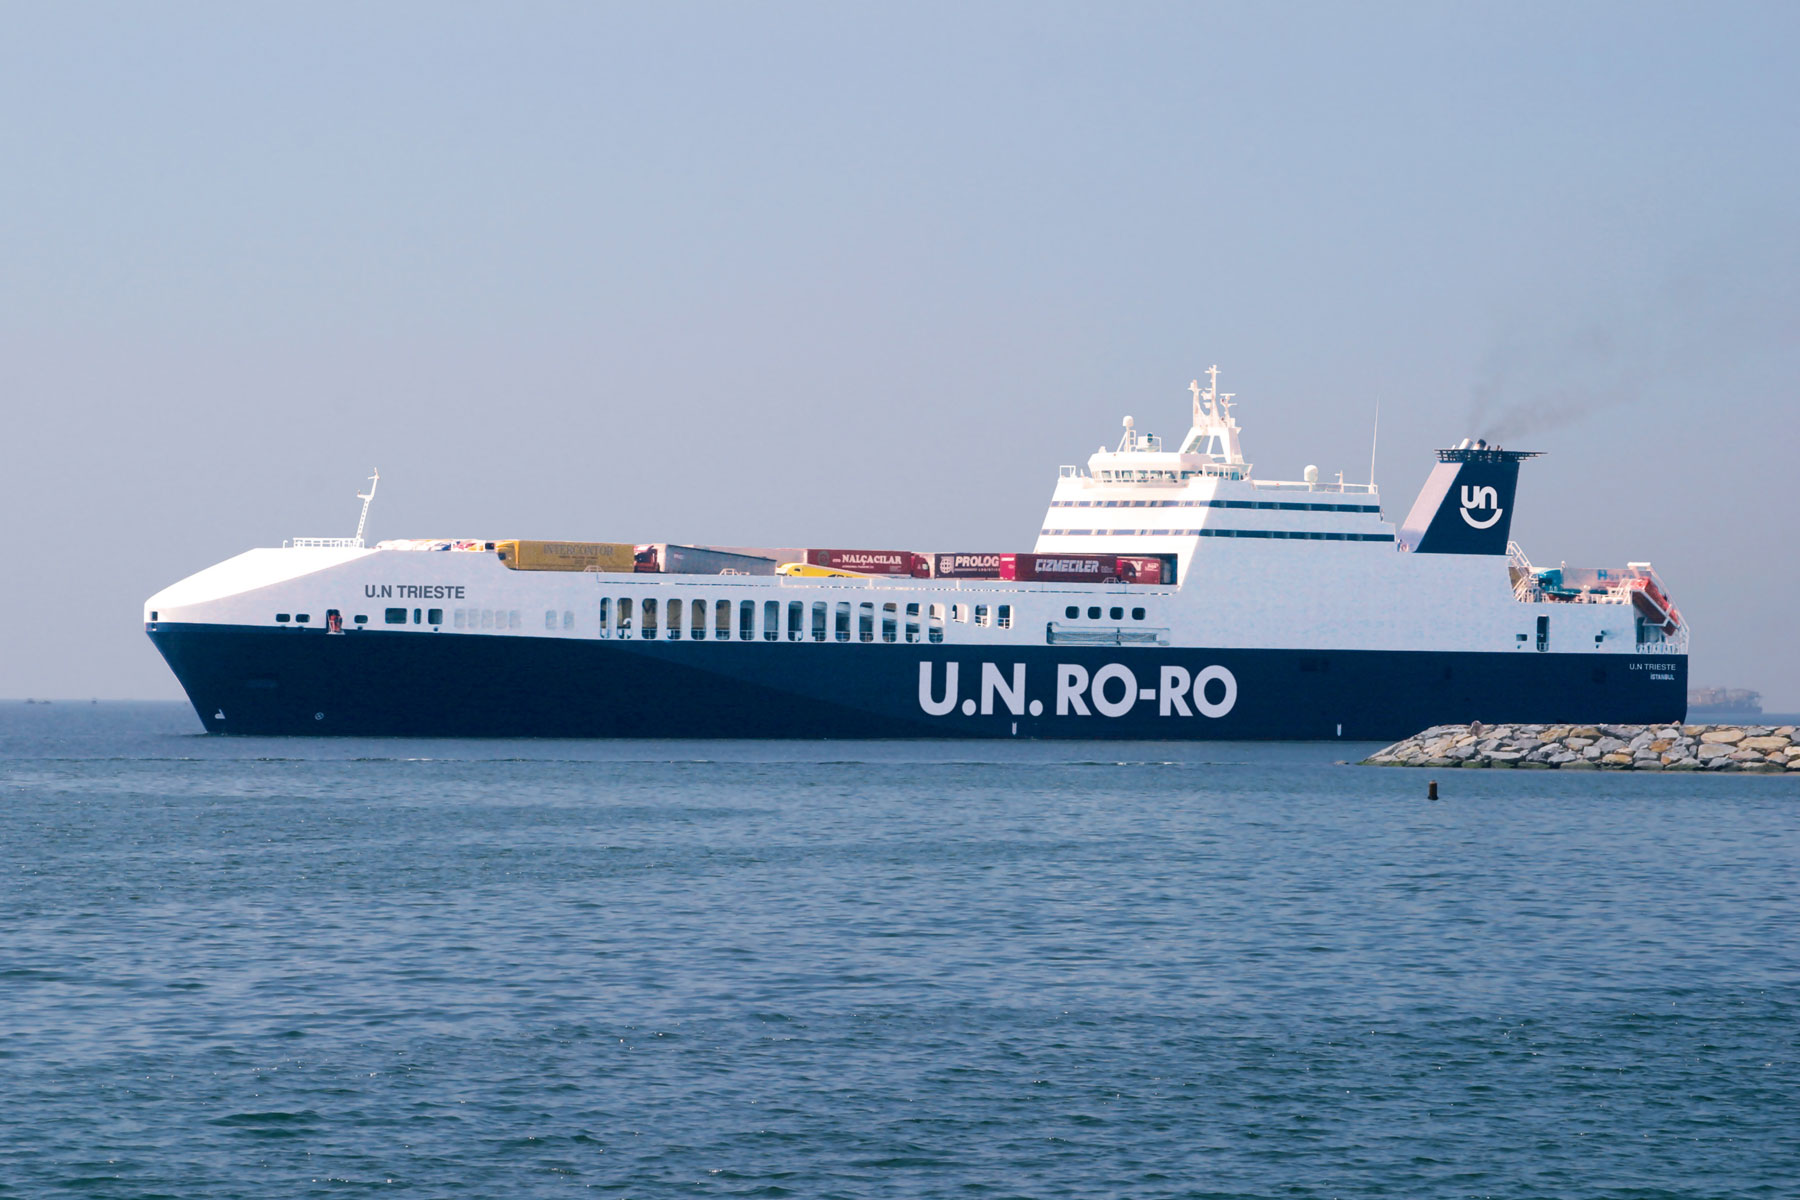 Turkish freight ferry company U.N. Ro-Ro is now part of DFDS